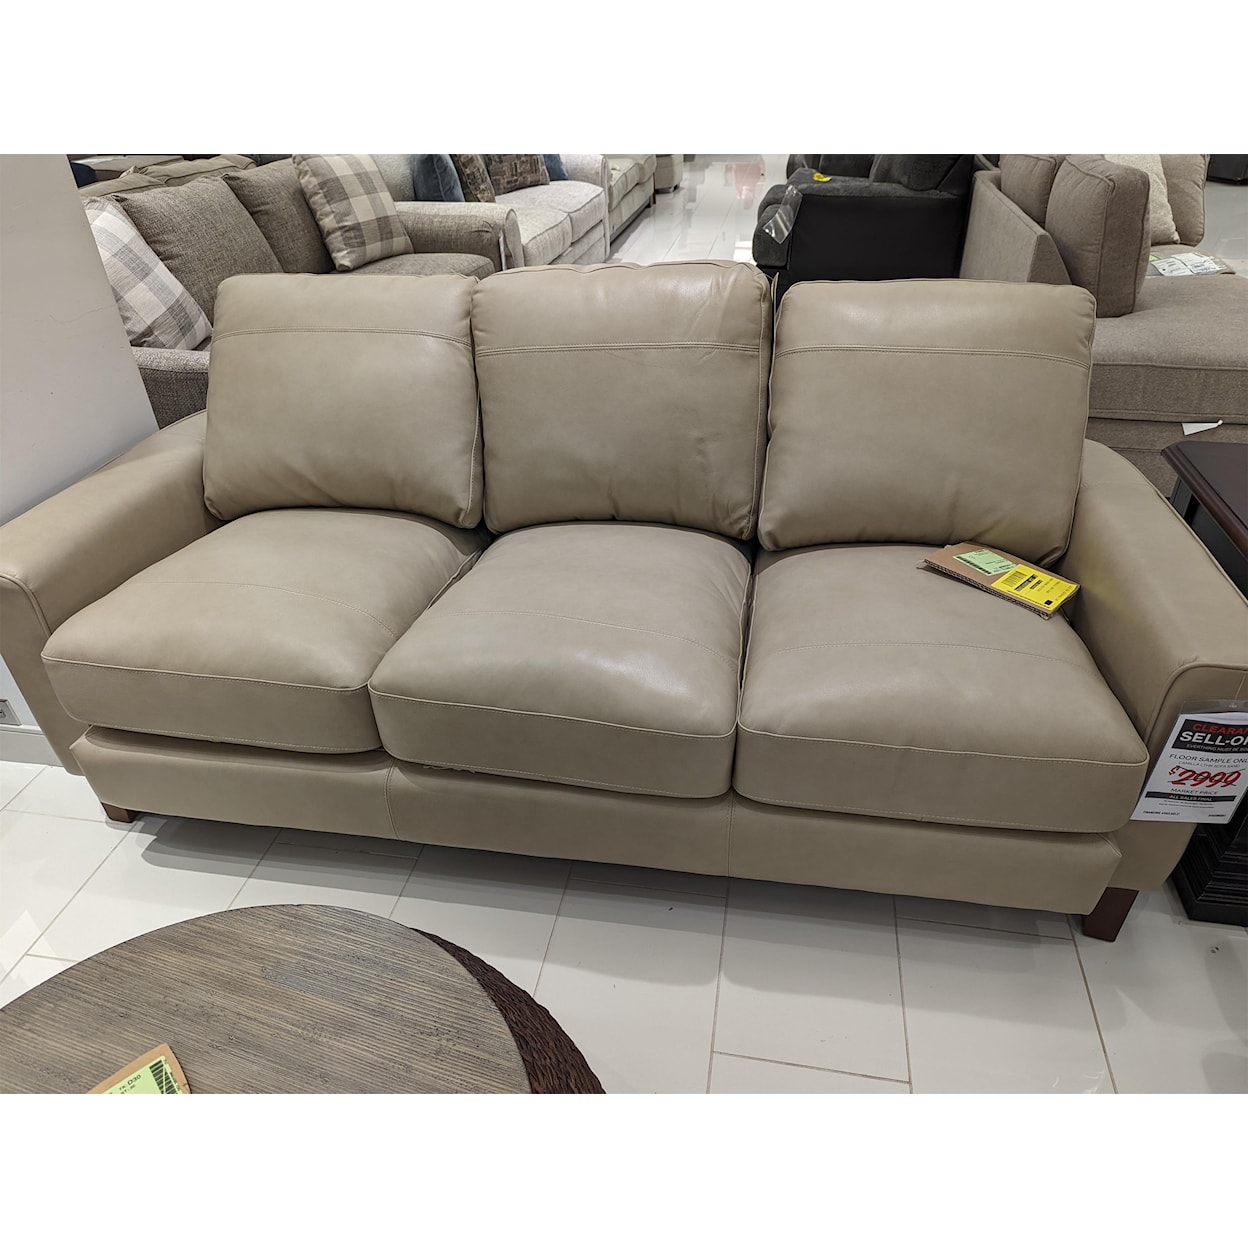 Morris Outlet Clearance and Closeouts Fairfield Commons Mall Last One! Leather Sofa!